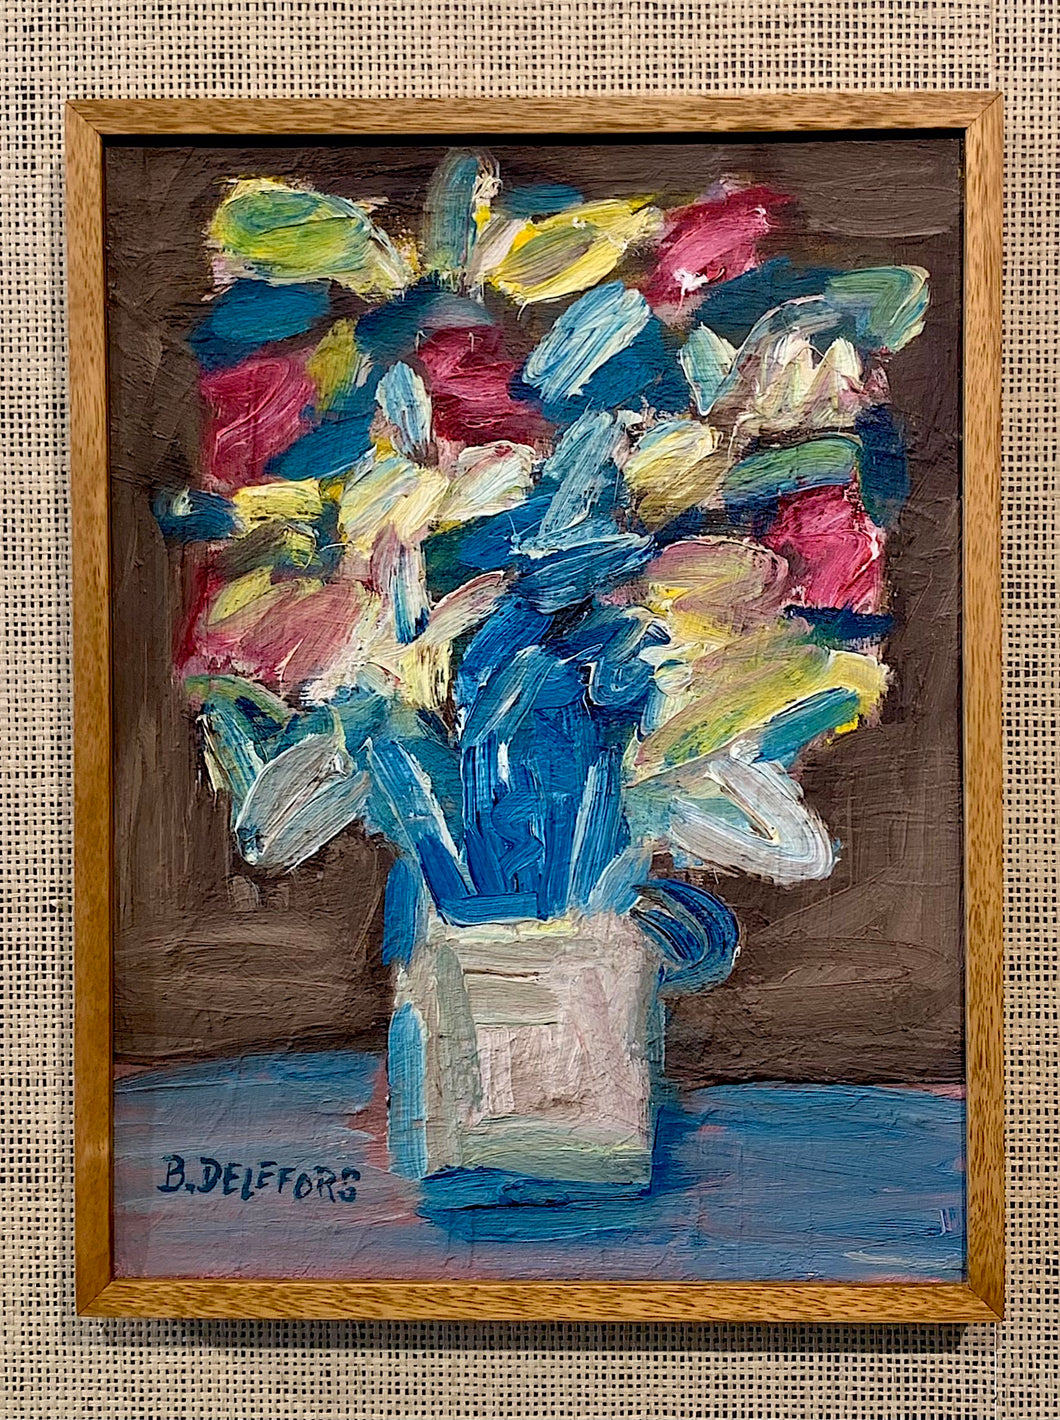 'Vase with Flowers' by Bengt Delefors